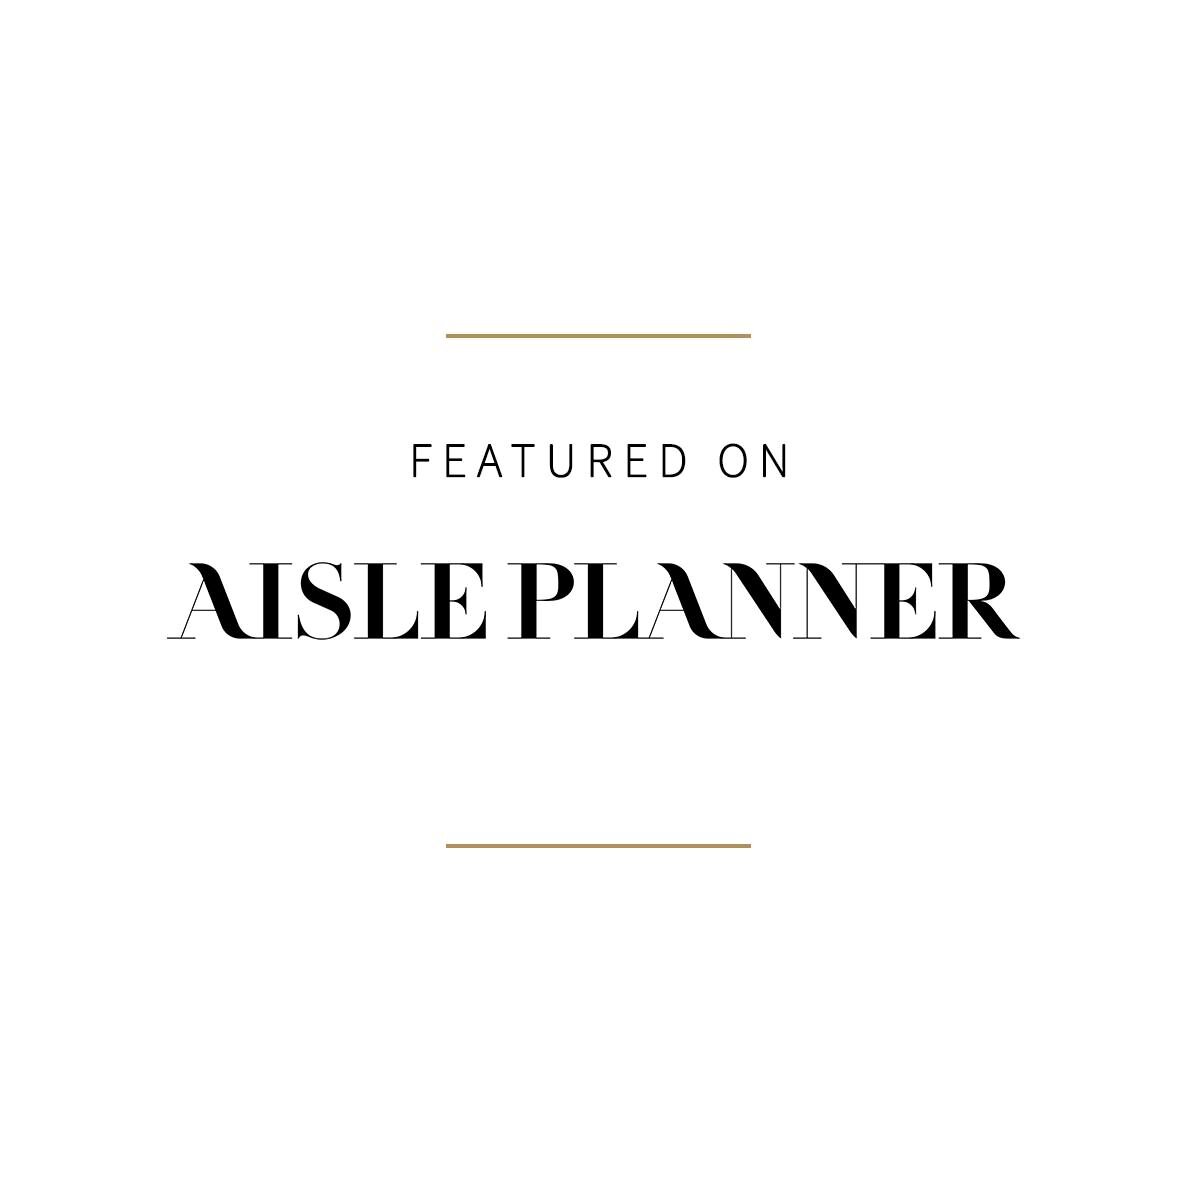 featured-on-aisle-planner-white.jpg